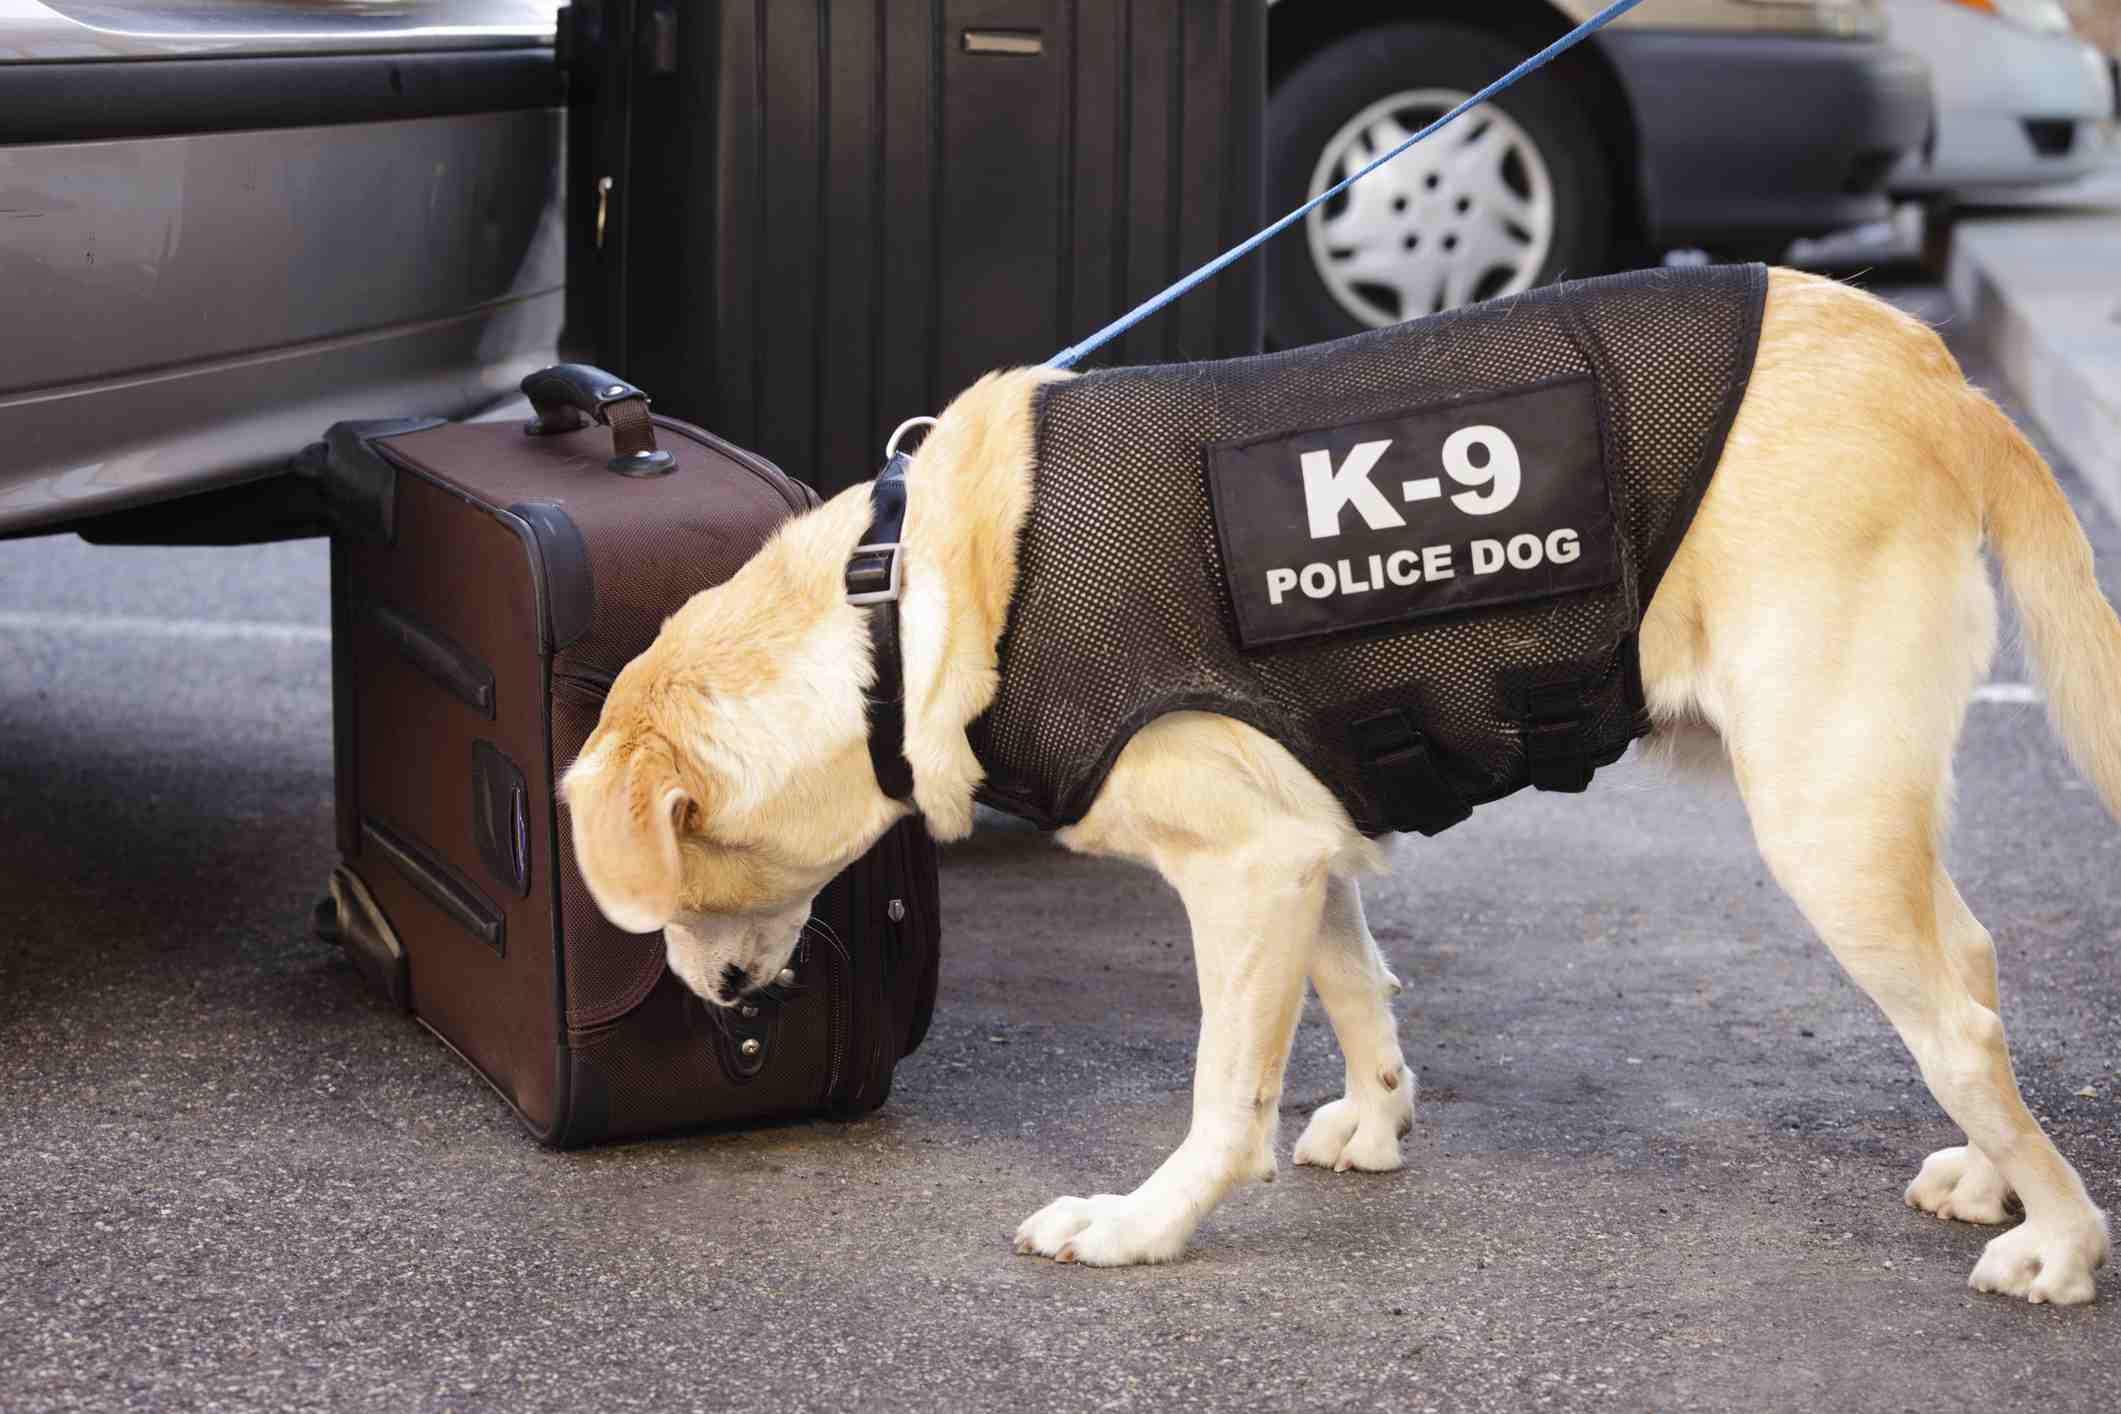 Police dog sniffing suitcase